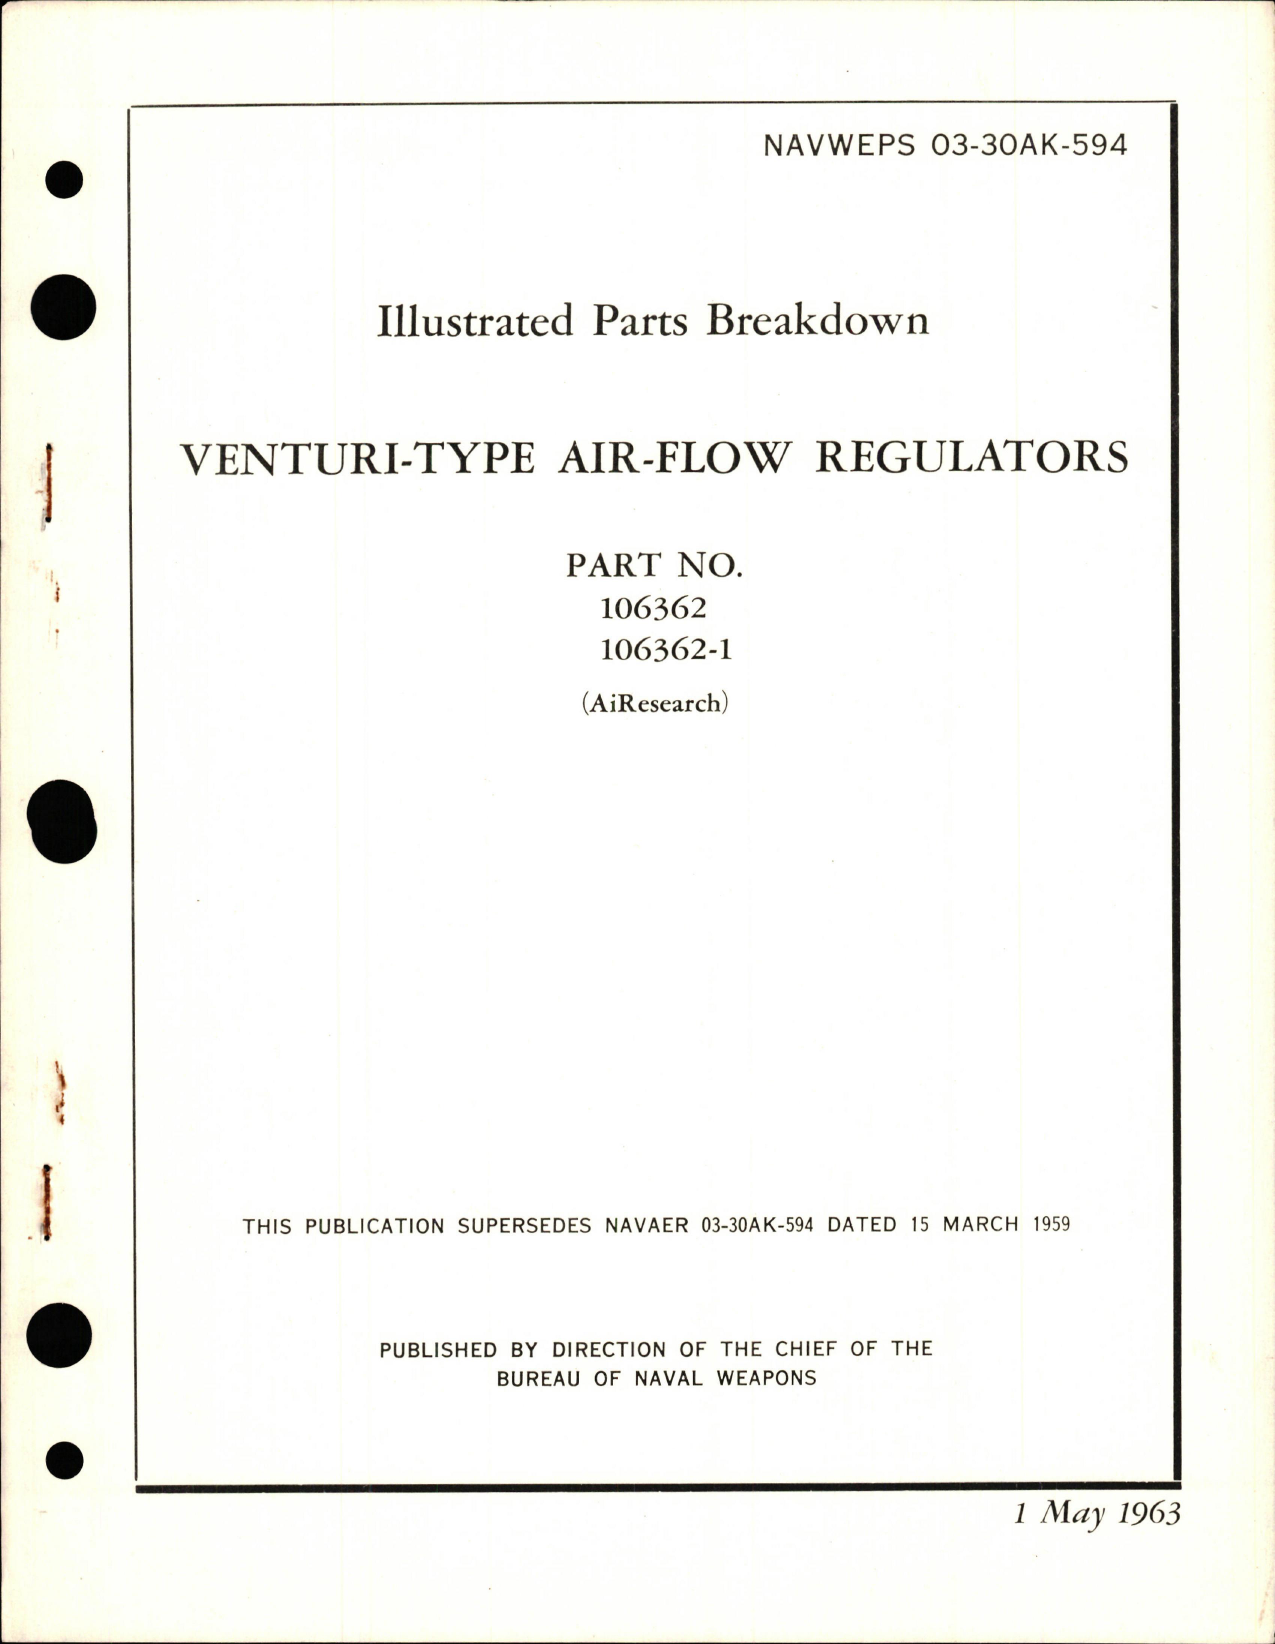 Sample page 1 from AirCorps Library document: Illustrated Parts Breakdown for Venturi-Type Air-Flow Regulators - Parts 106362 and 106362-1